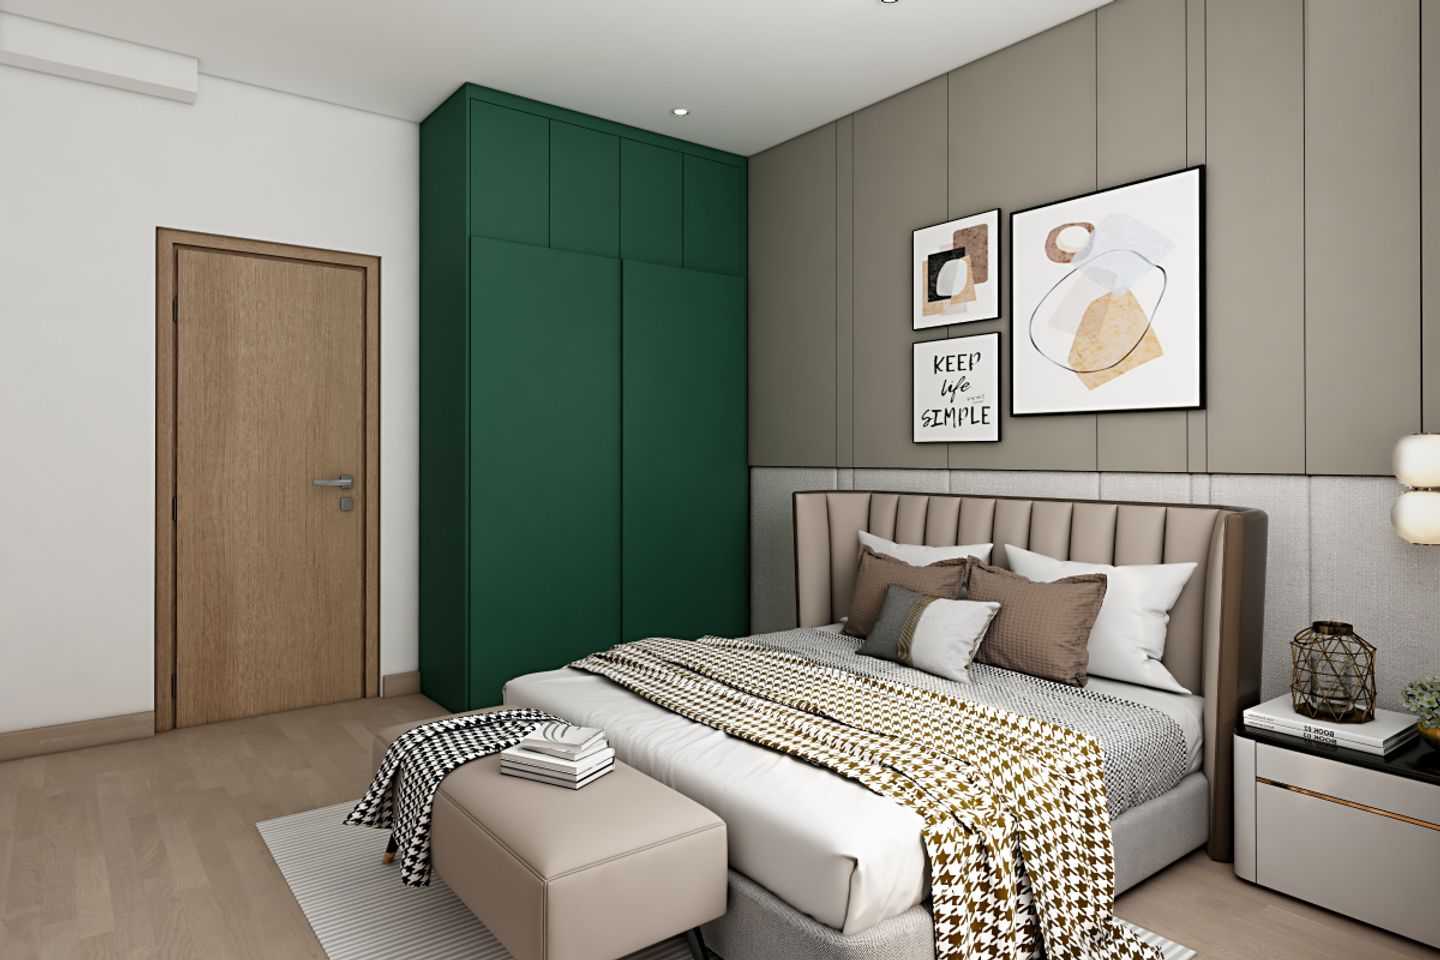 Master Bedroom With Two-Toned Accent Wall - Livspace